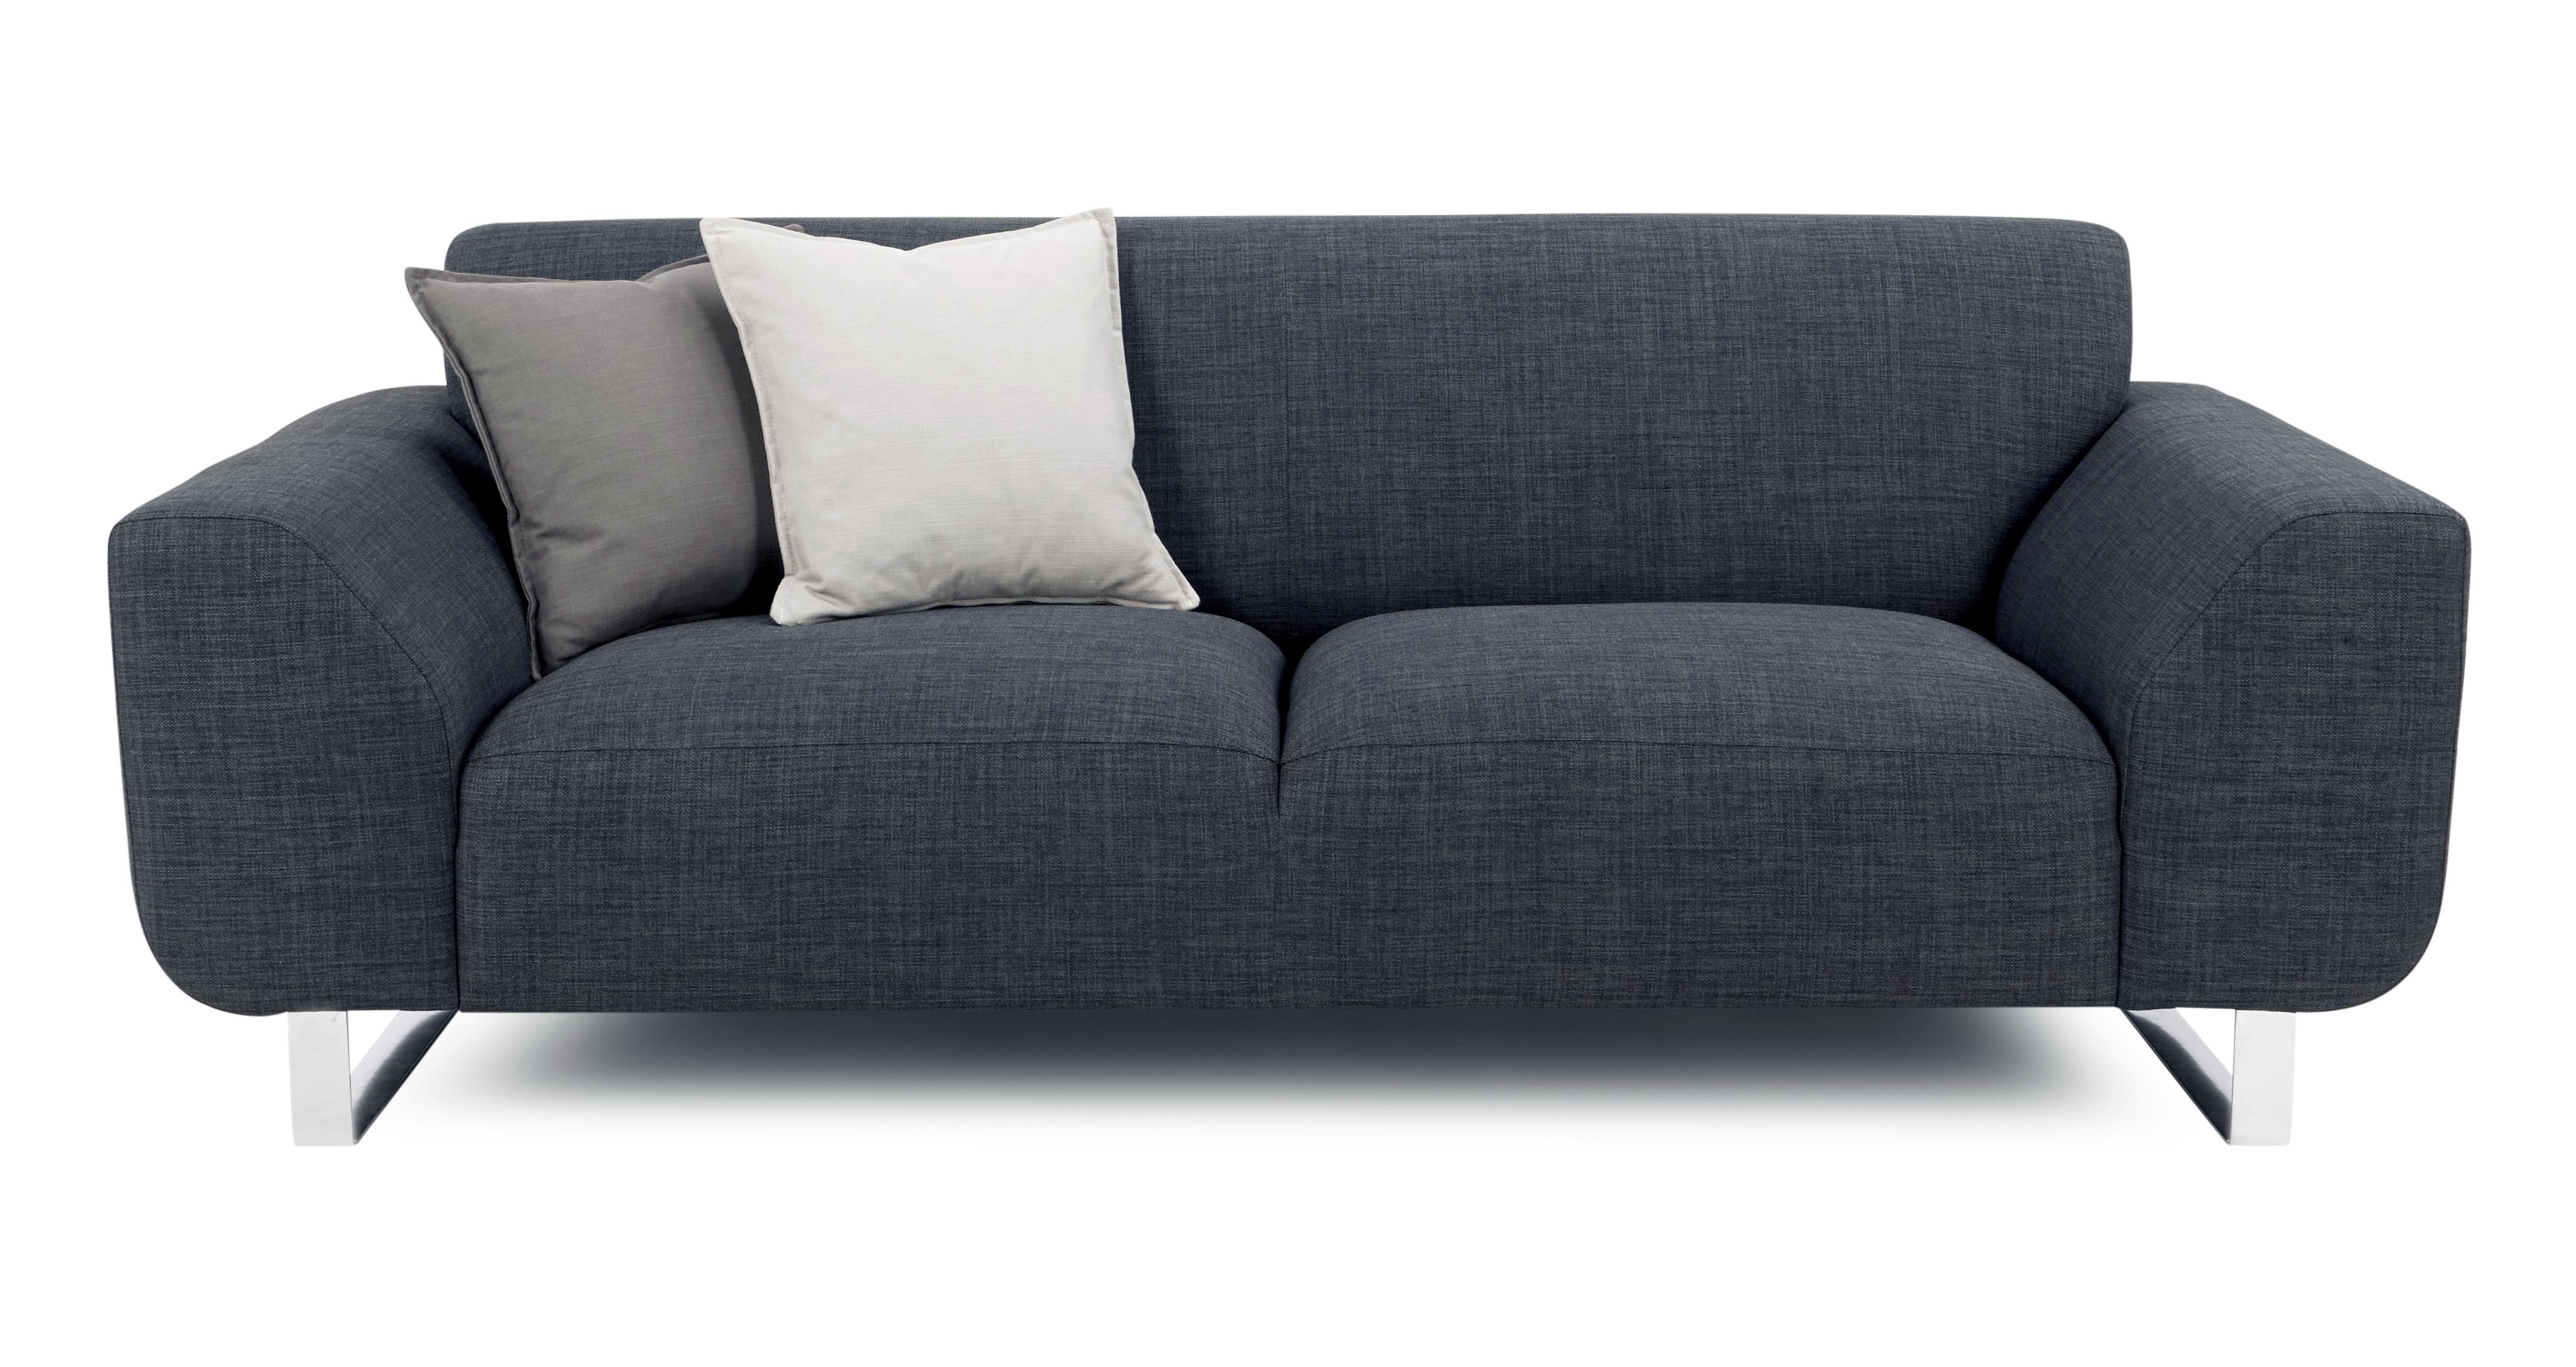 Hardy 3 Seater Sofa Revive | DFS